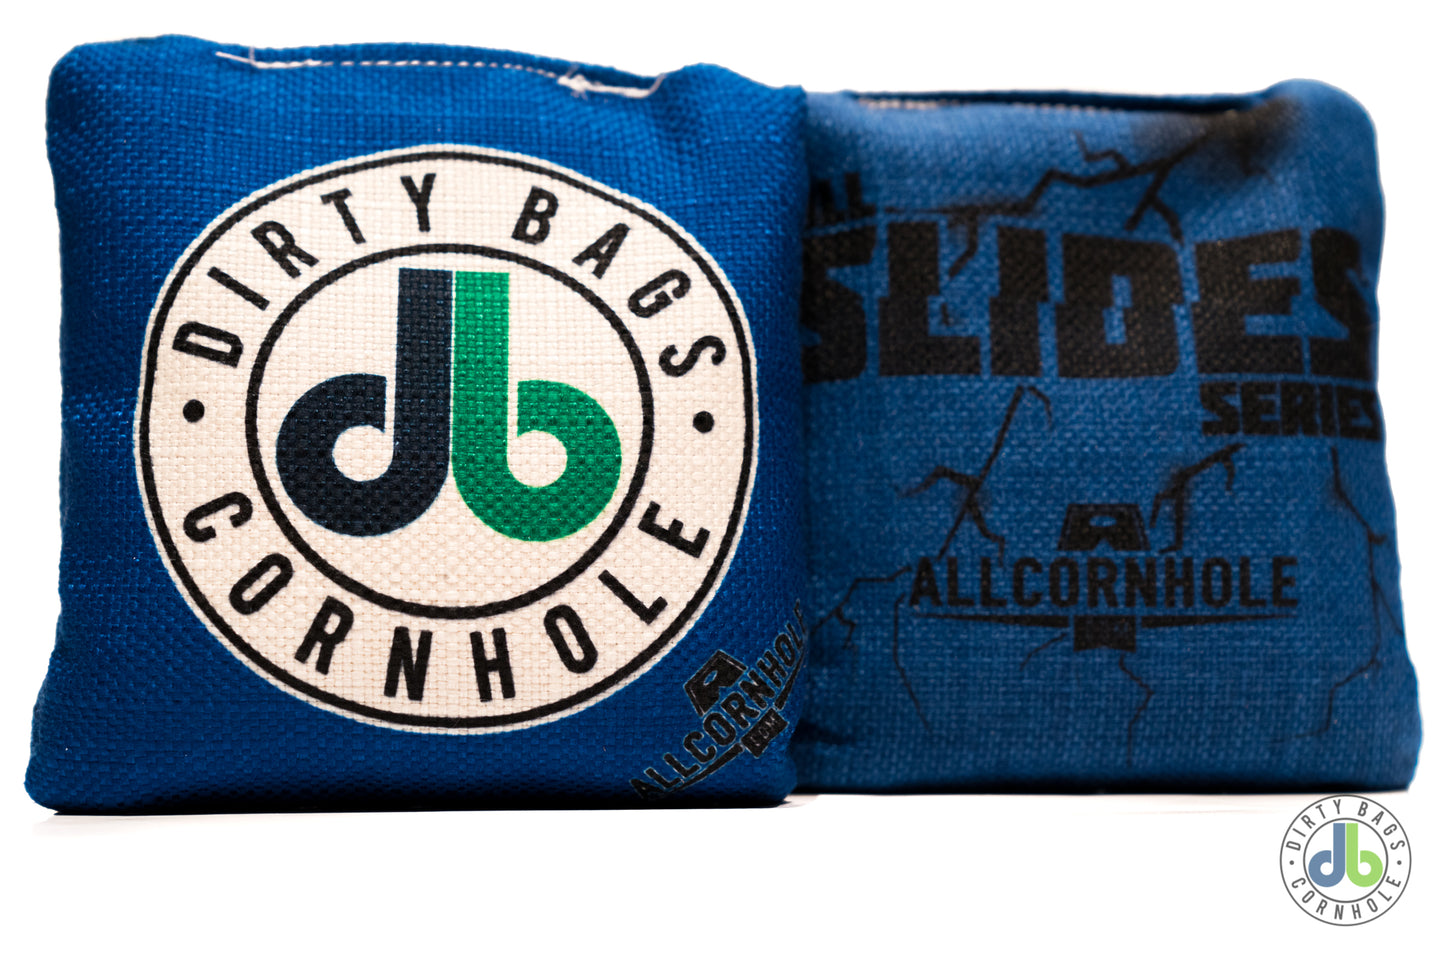 All Slides - Dirty Bags Logo (Set of 4)